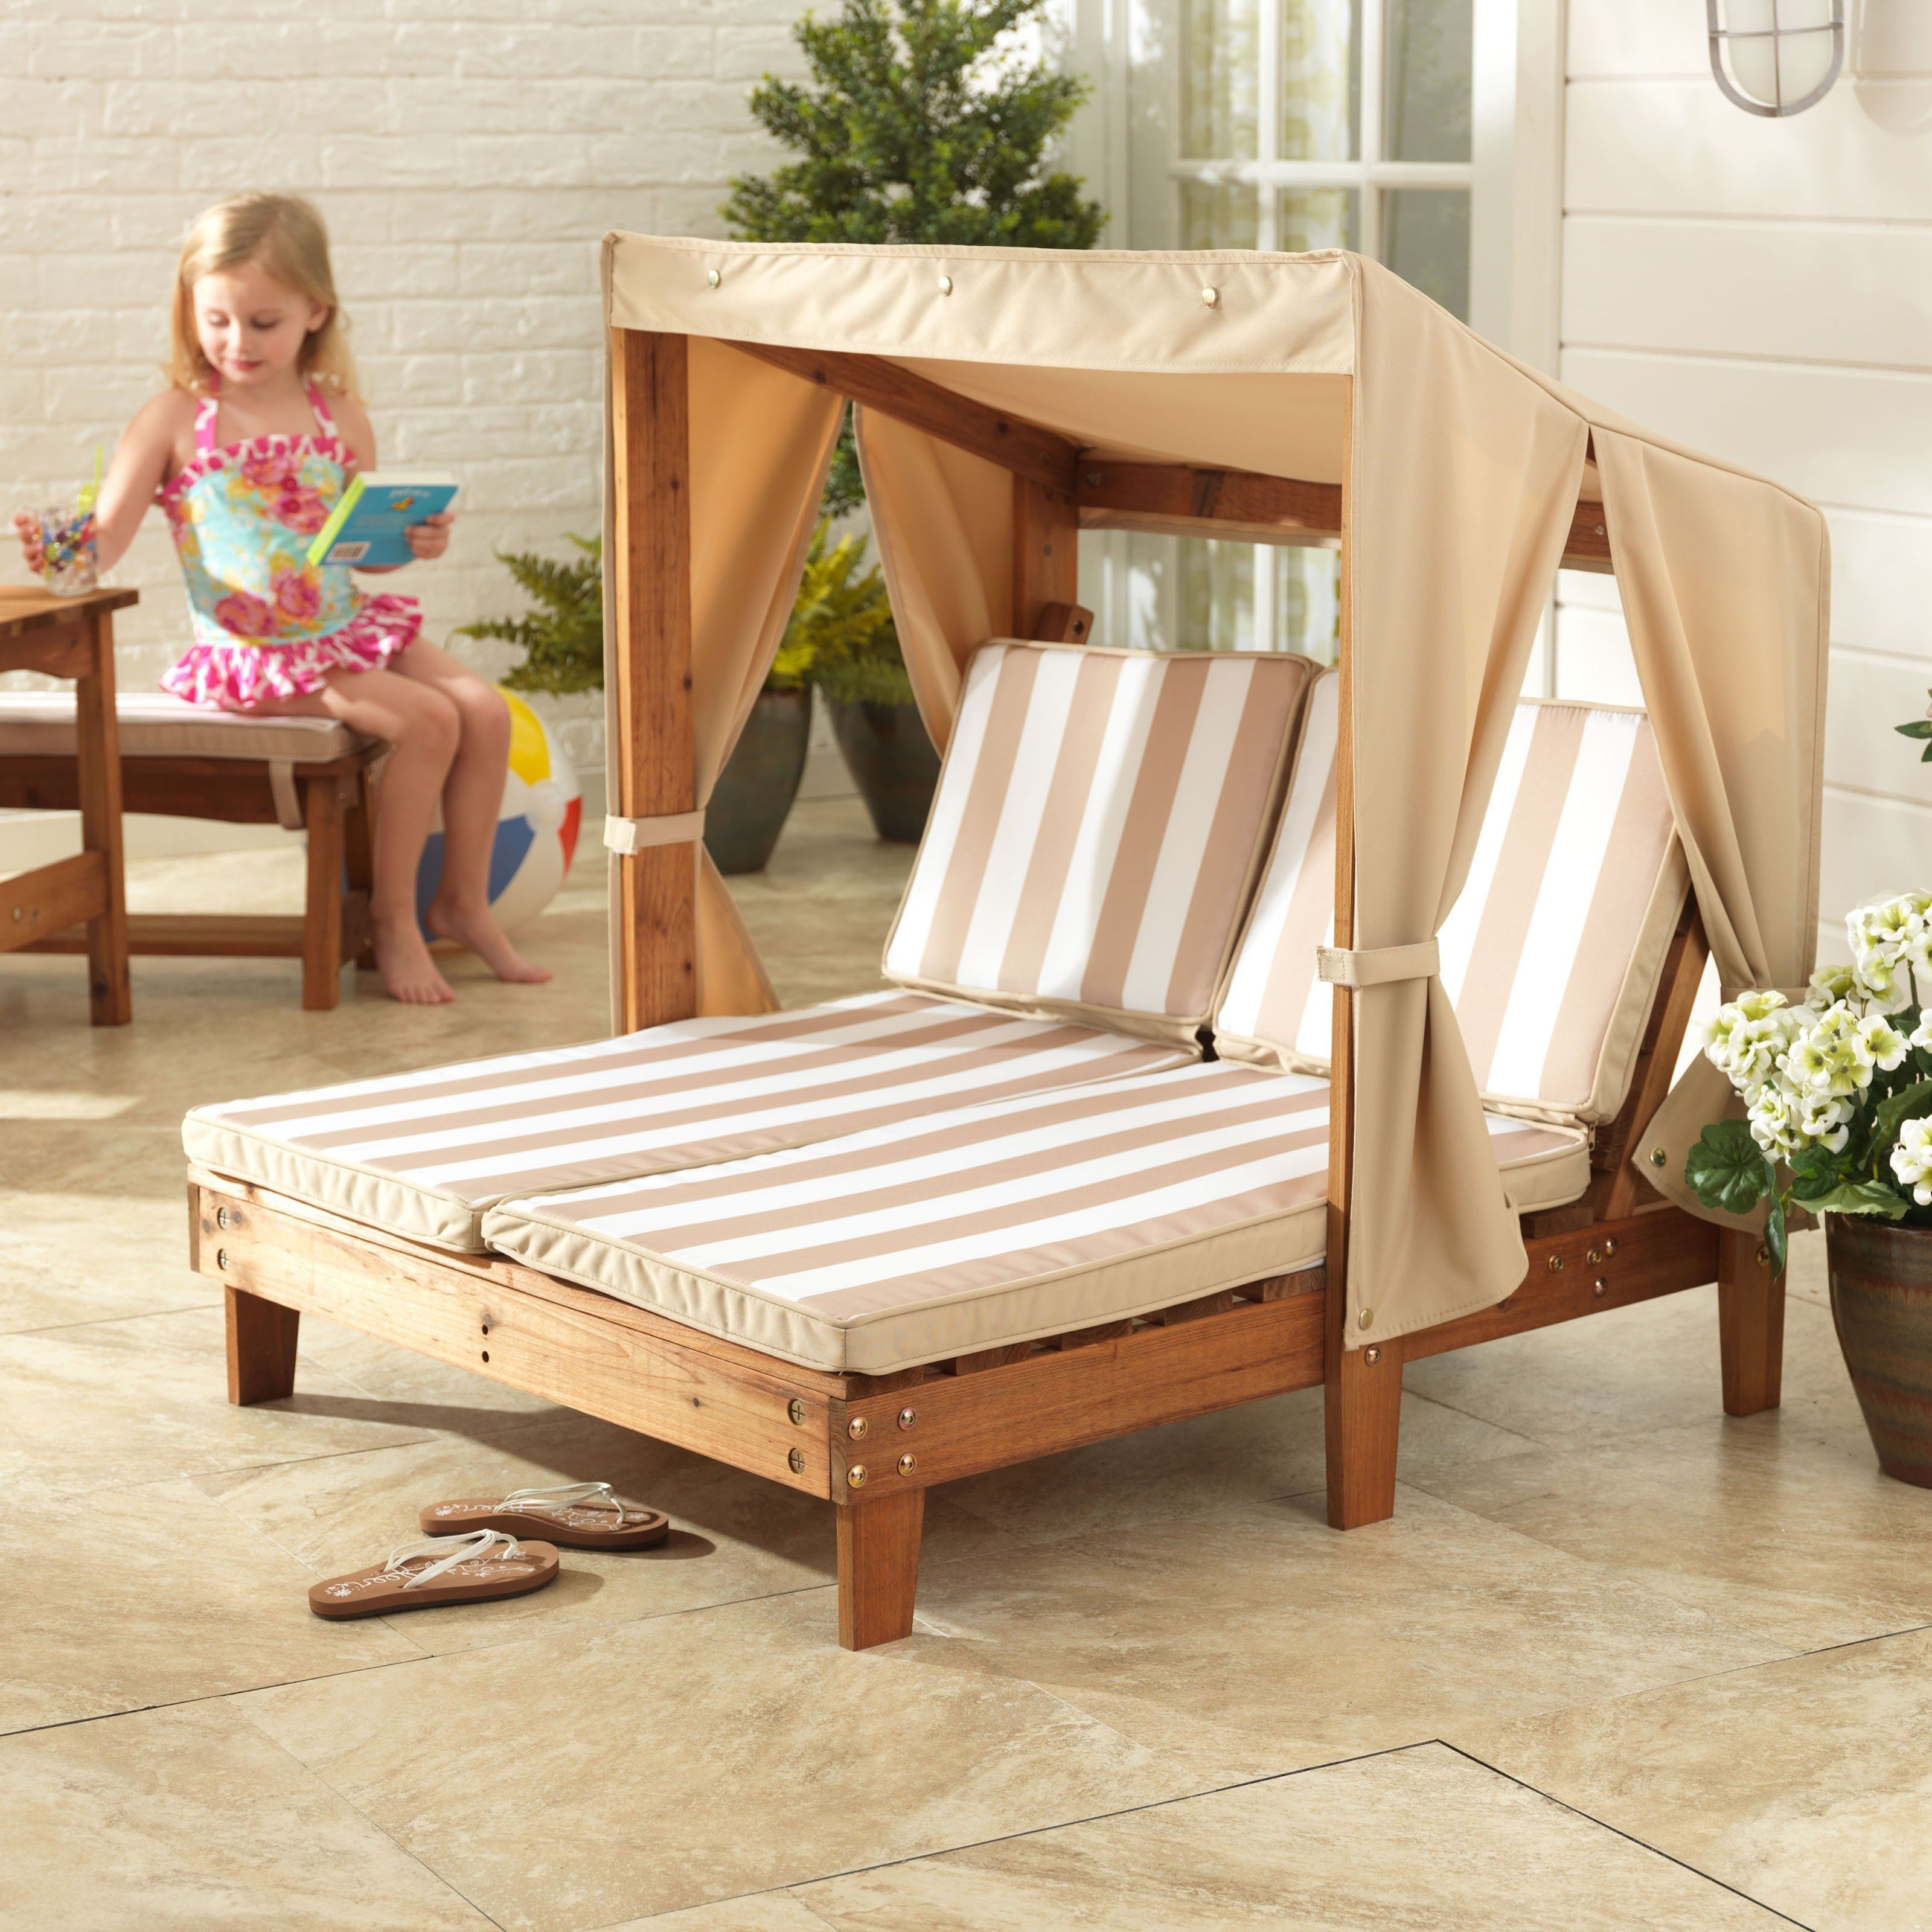 Children's Chaise Lounges Throughout Latest Kidkraft Double Chaise Chair – 502 – Walmart (View 15 of 15)